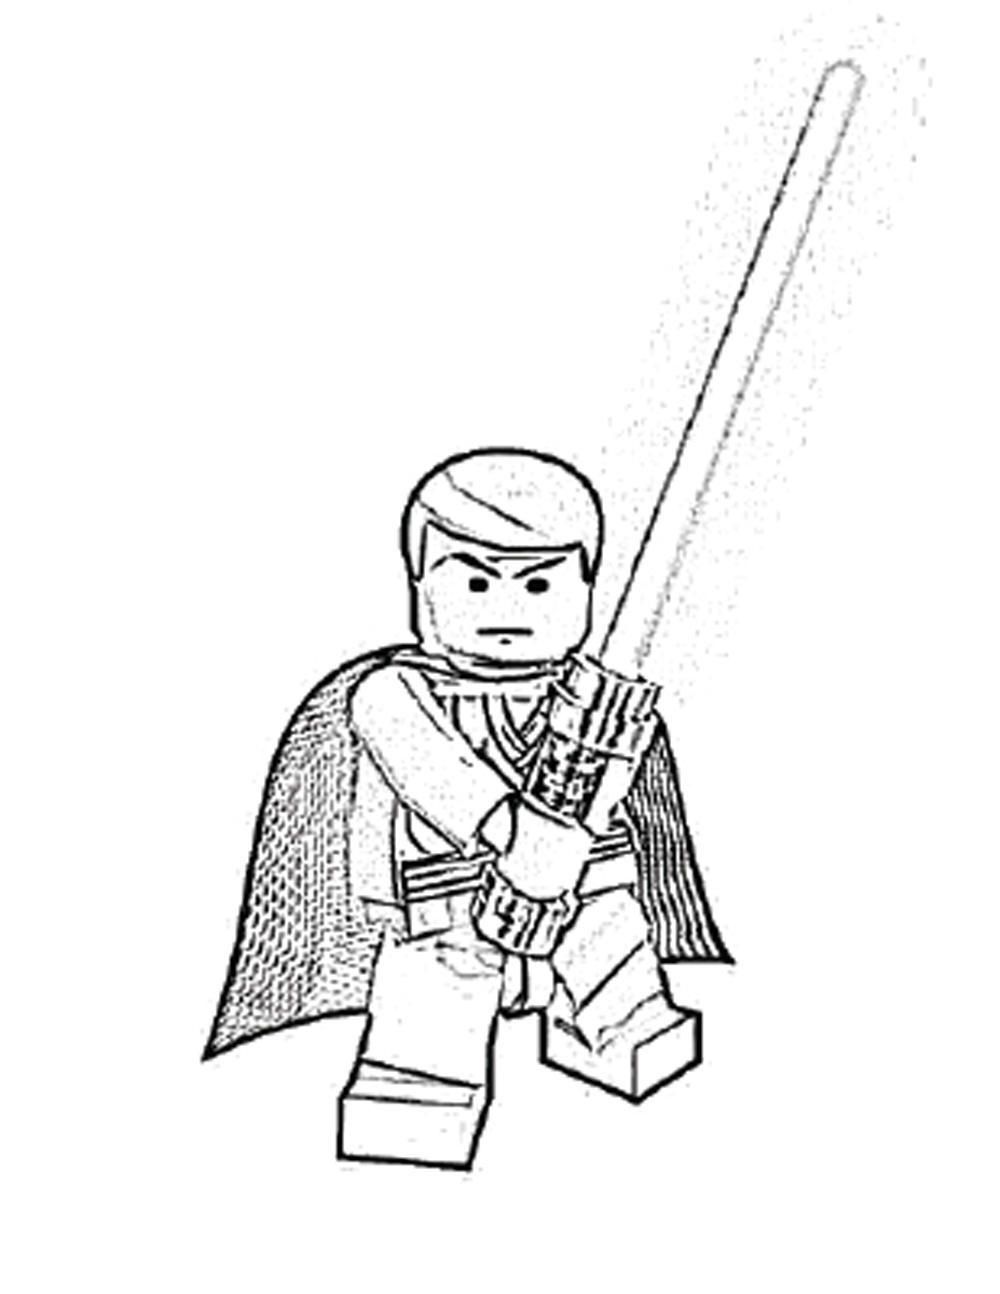 Free lego luke skywalker coloring pages download free lego luke skywalker coloring pages png images free cliparts on clipart library